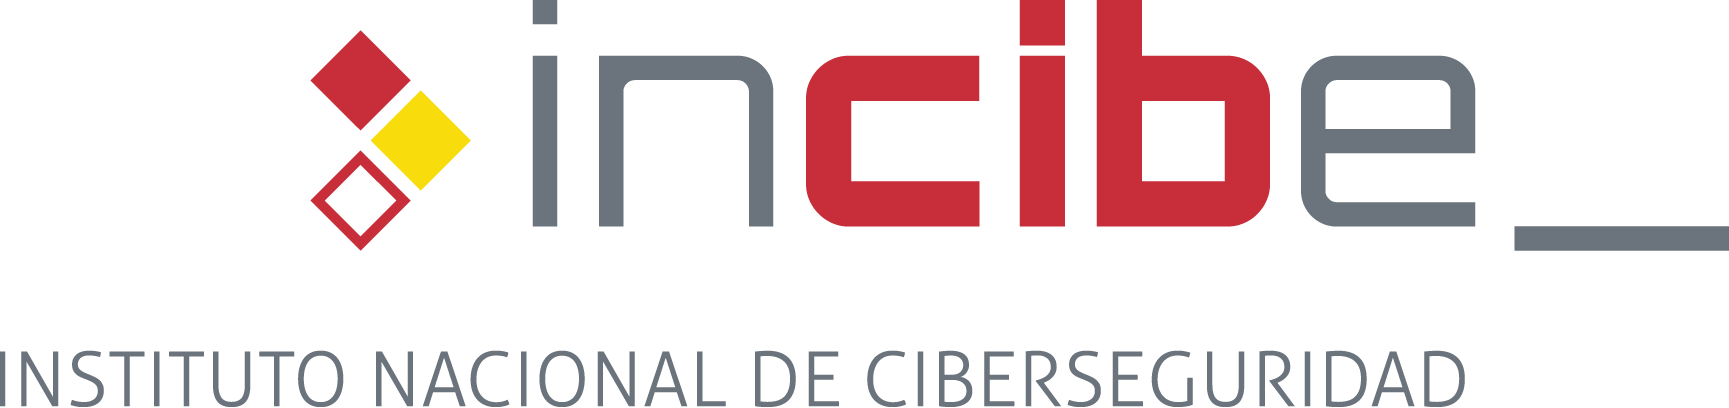 Spanish National Cybersecurity Institute (INCIBE)